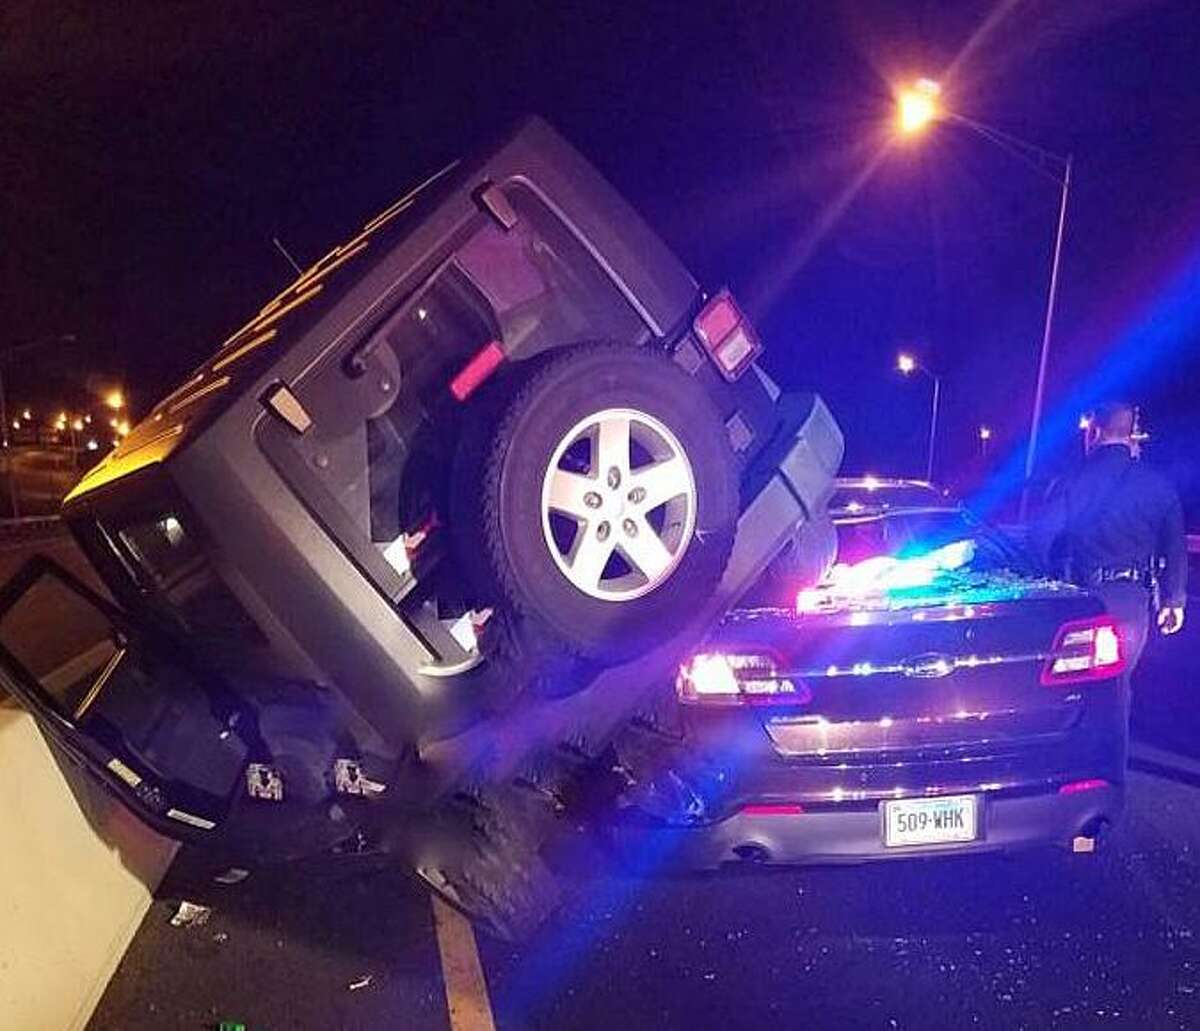 A veteran state police detective was injured after a a drunk driver slammed into his cruiser on Thursday, Nov. 3, 2016. Michael Gauvin, 43, of East Hartford, hit the cruiser after side-swiping a DOT truck. Gauvin was charged with driving under the influence, failure to maintain proper Lane and failure to slow down and move over for emergency vehicles.